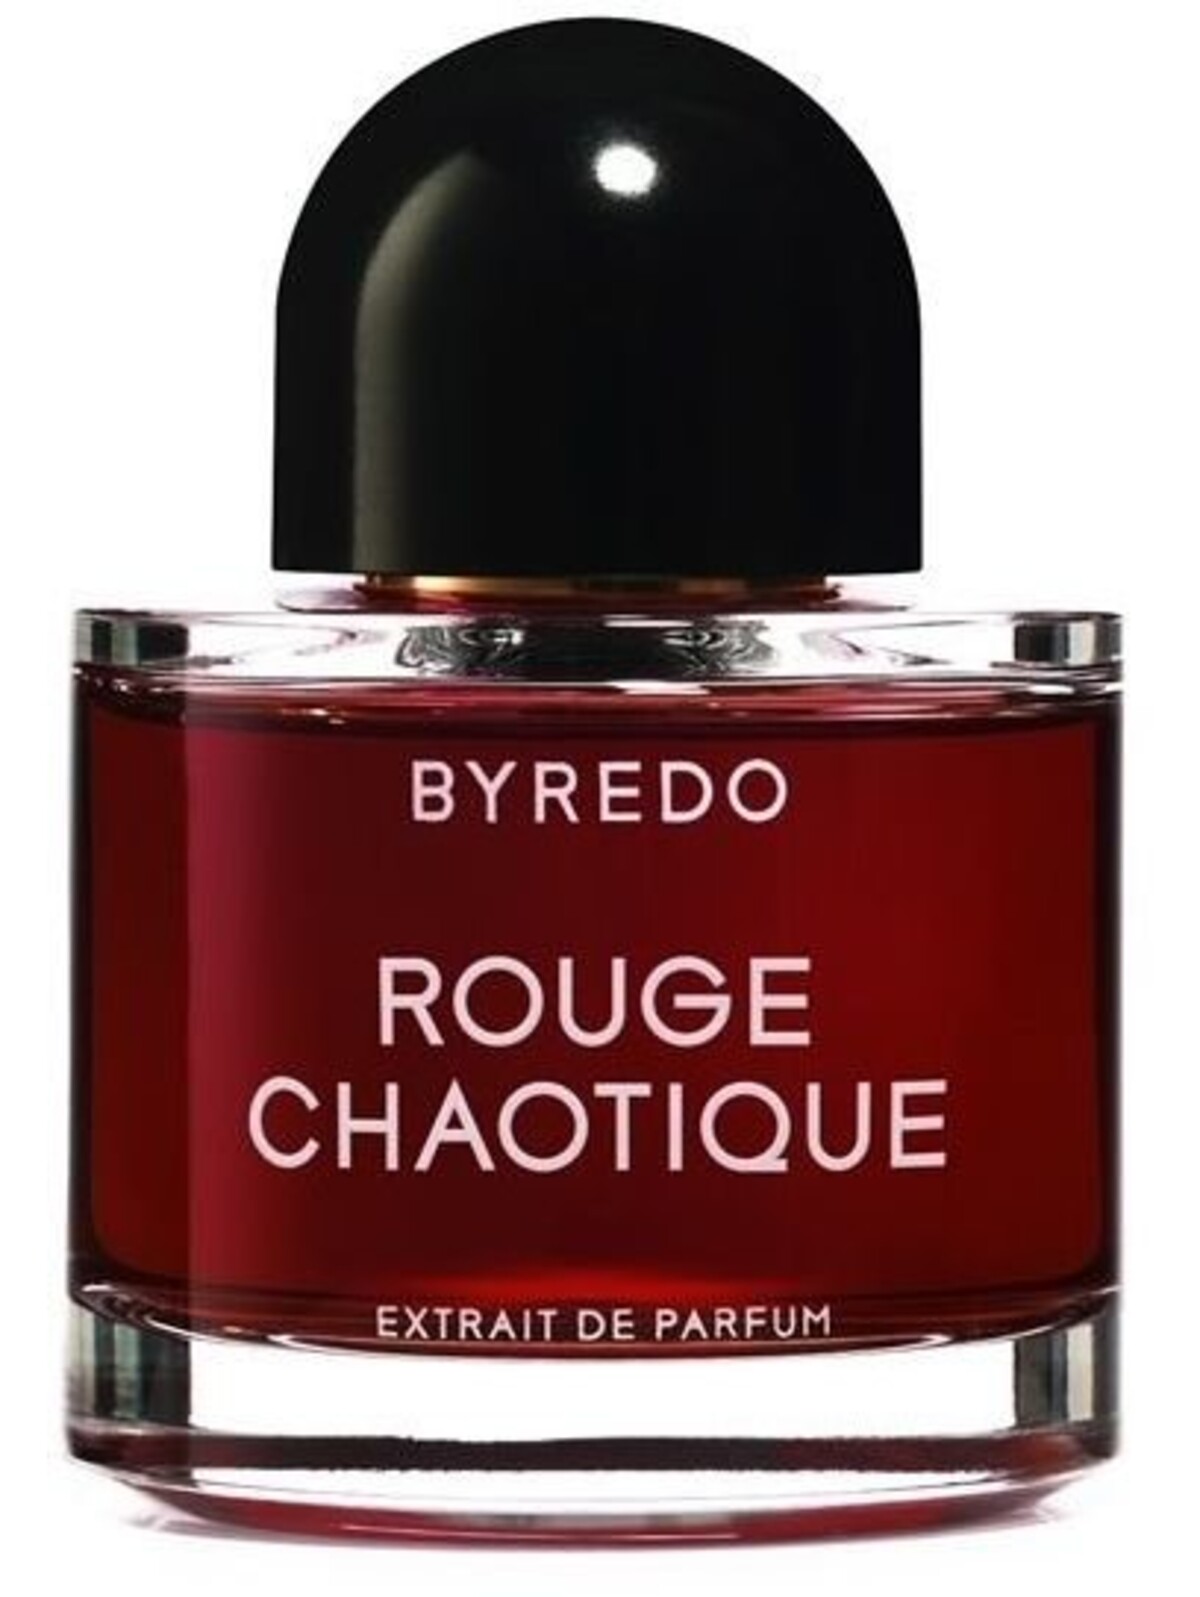 BYREDO ROUGE CHAOTIQUE.